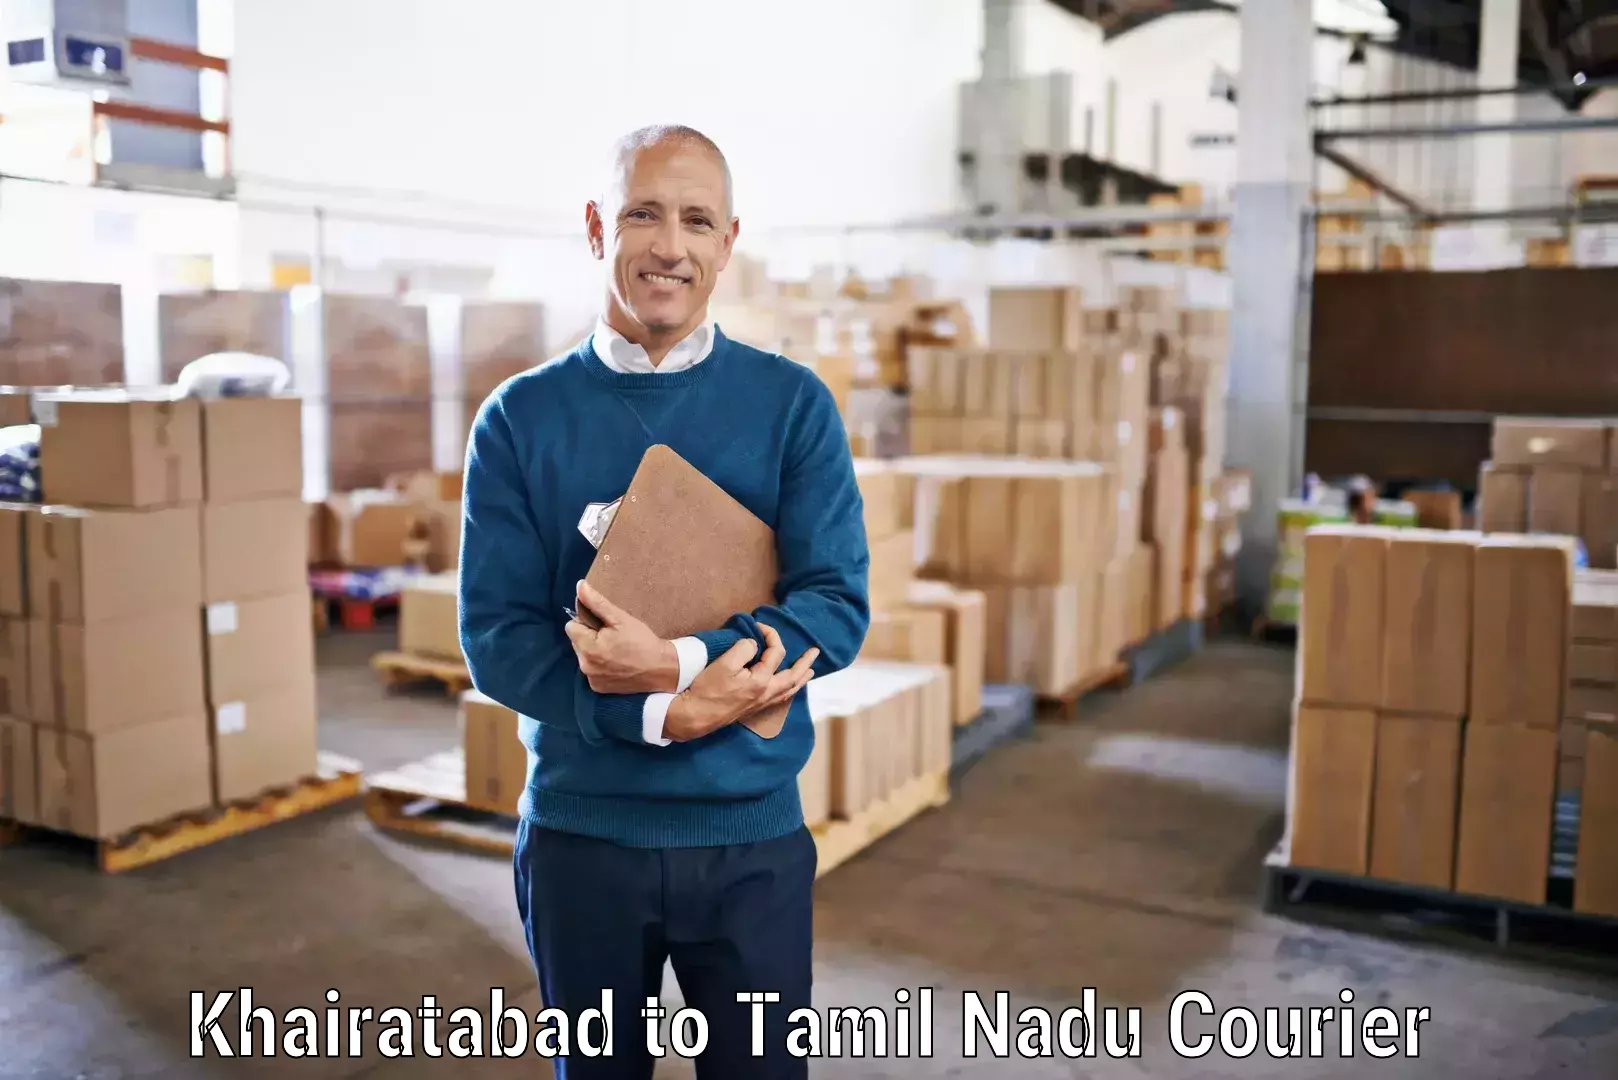 Courier service booking Khairatabad to Chennai Port